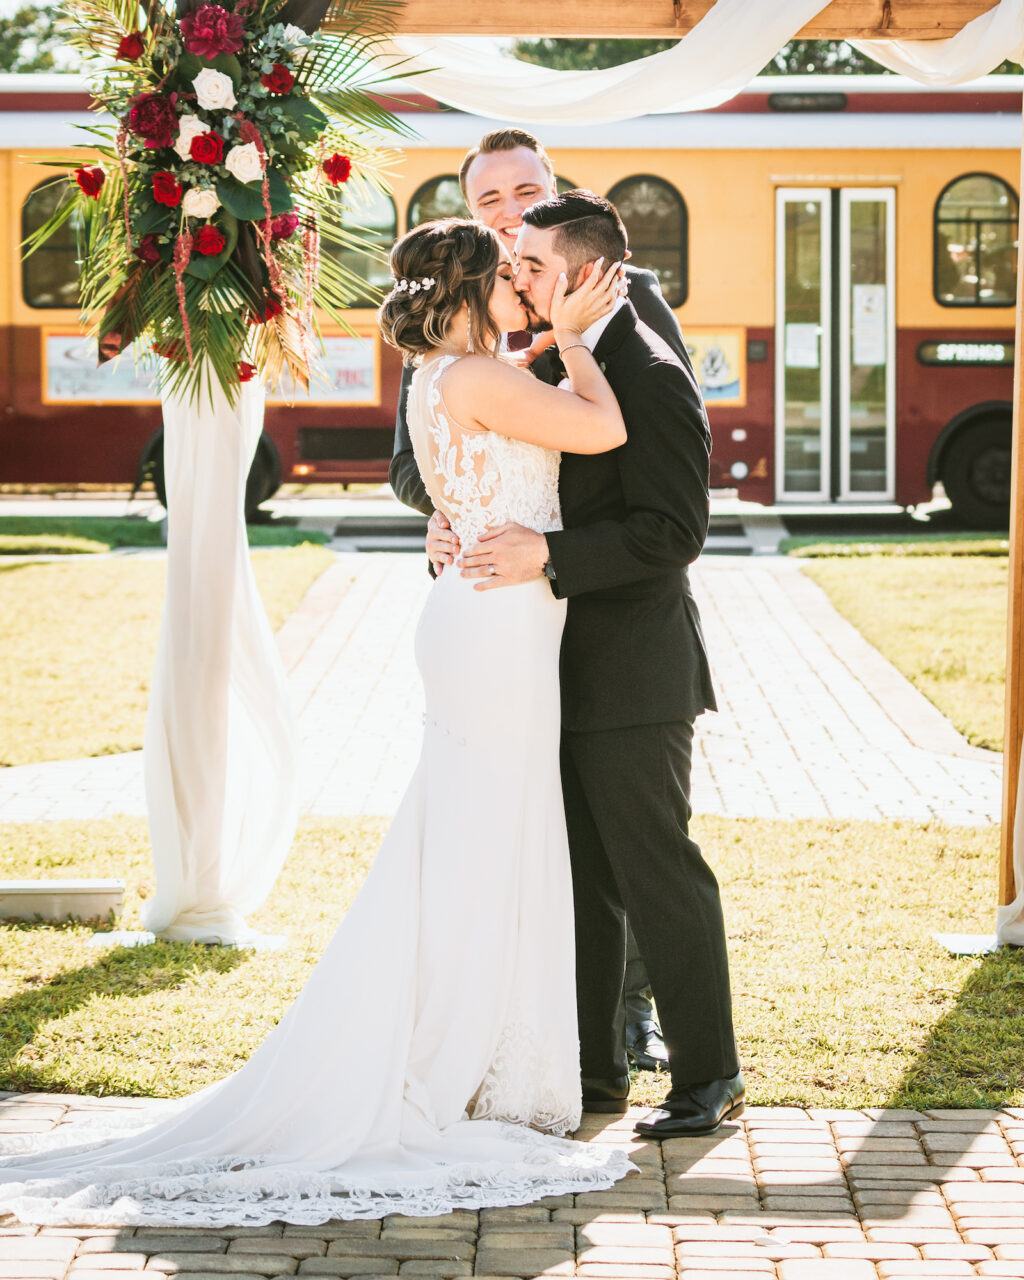 Florida bride and groom exchanging first kiss after exchanging wedding ceremony vows under arch with elegant tropical red roses and palm leaves floral arrangement, tram in background | Tampa Bay wedding photographer Bonnie Newman Creative | Wedding planner Coastal Coordinating | Wedding hair and makeup Femme Akoi | Wedding Florist Iza’s Flowers